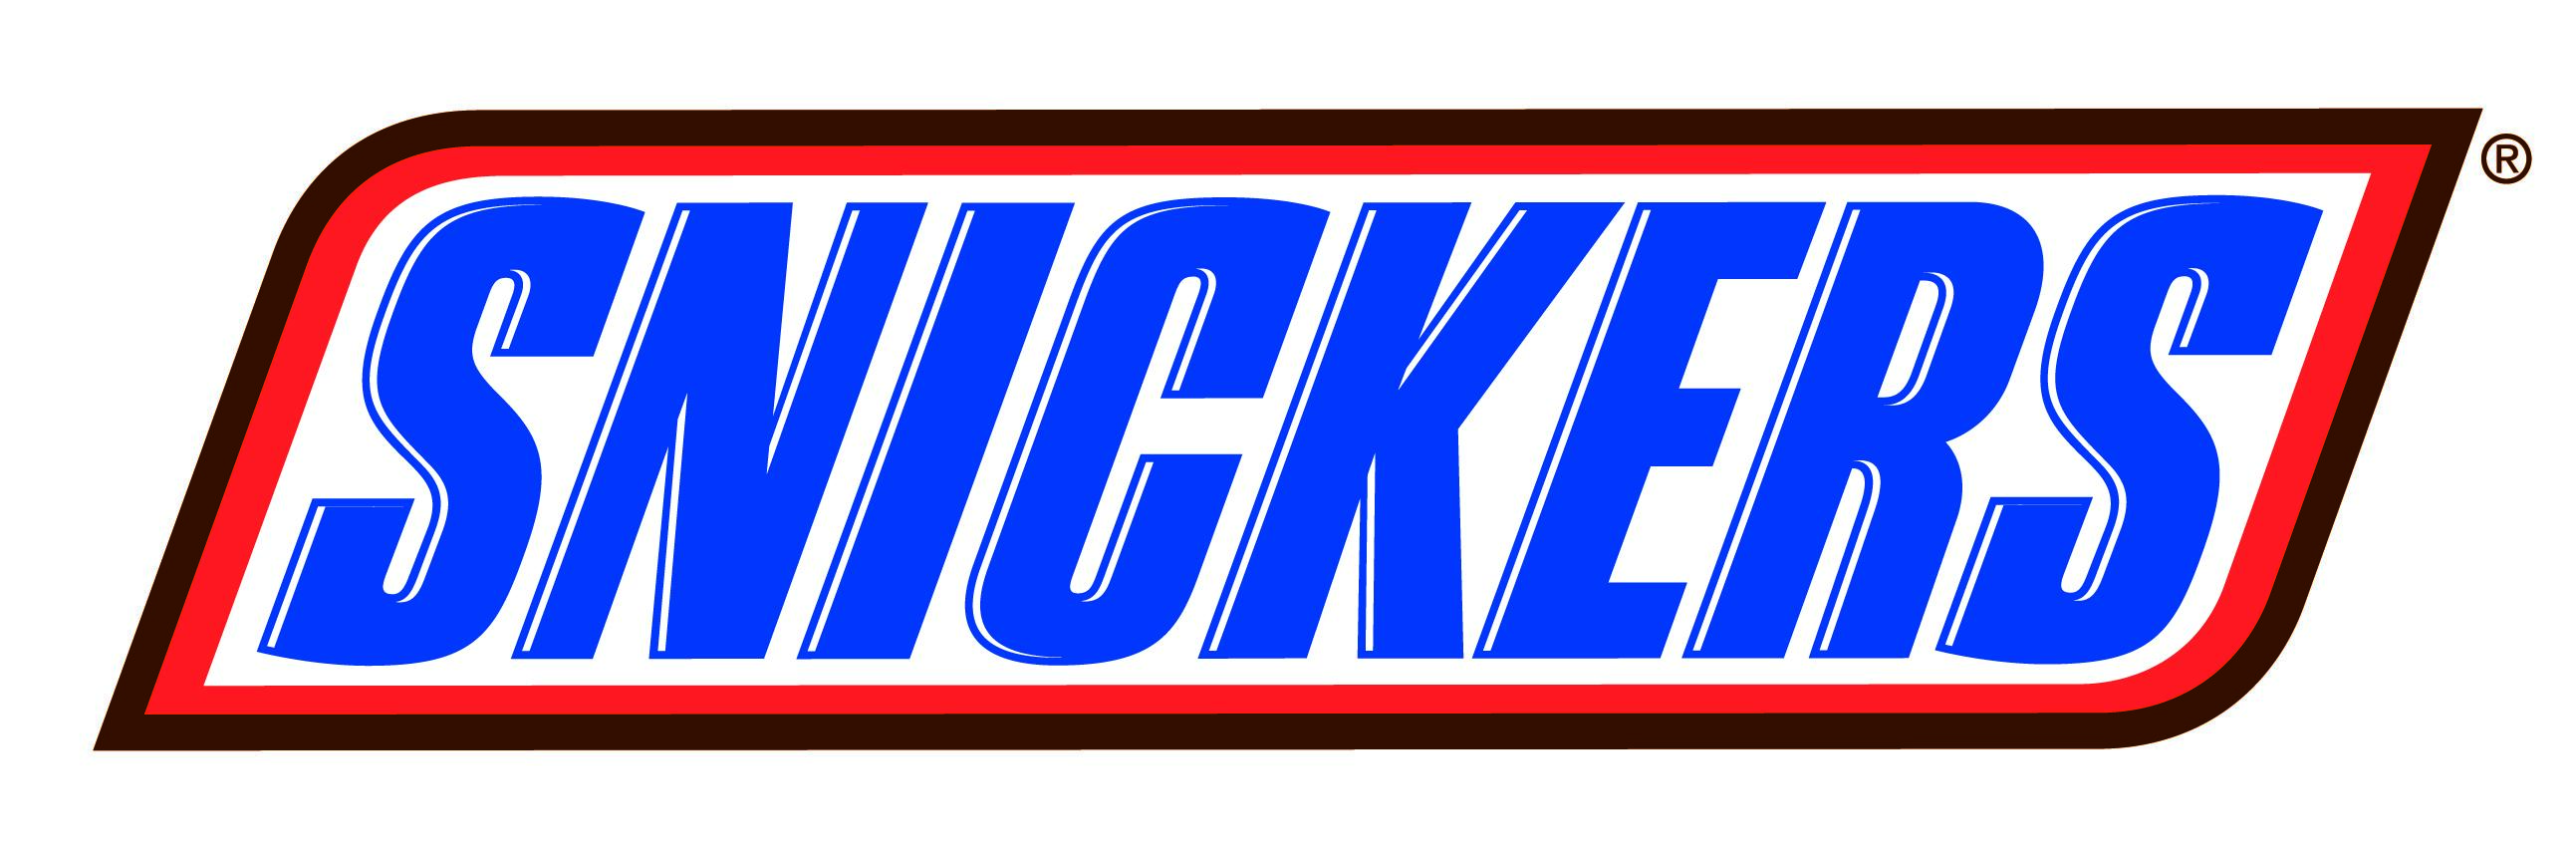 Snickers Protein Flapjack